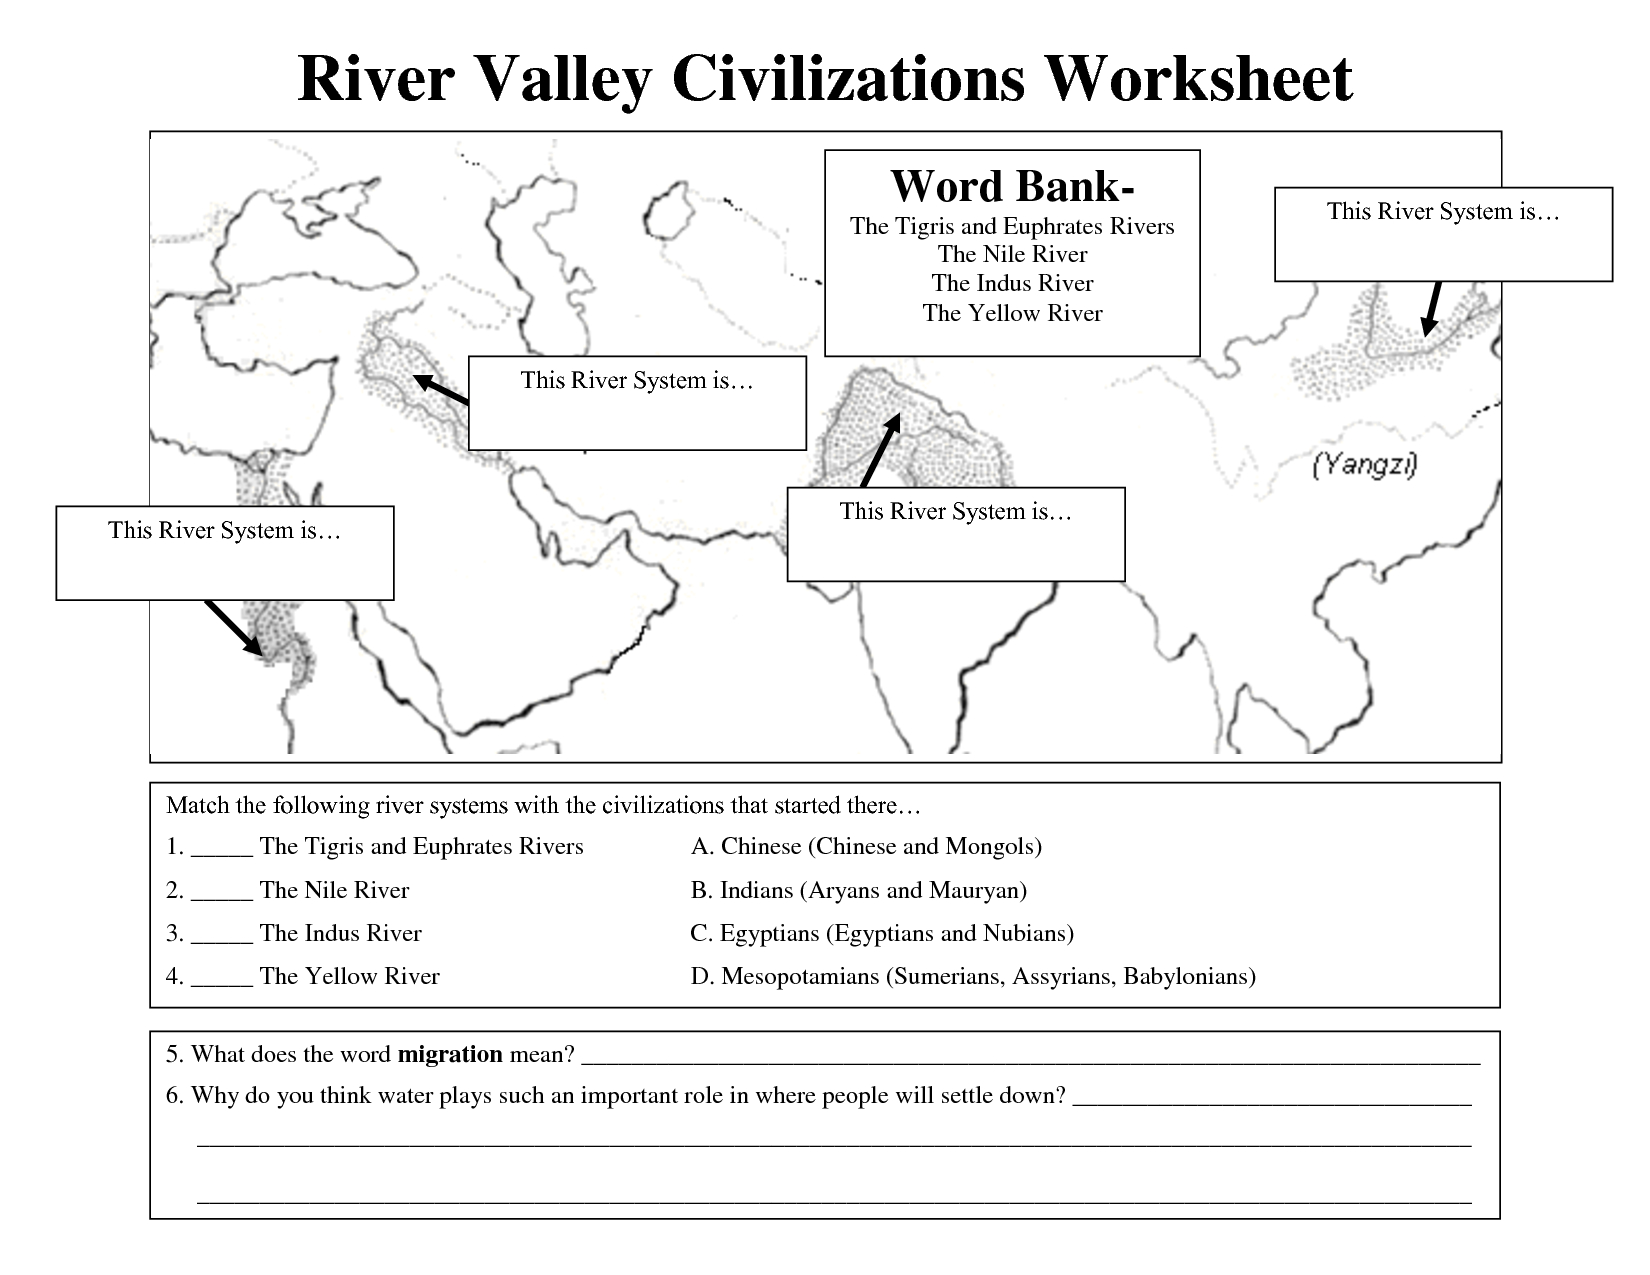 Early Civilizations Worksheet | River Valley Civilizations